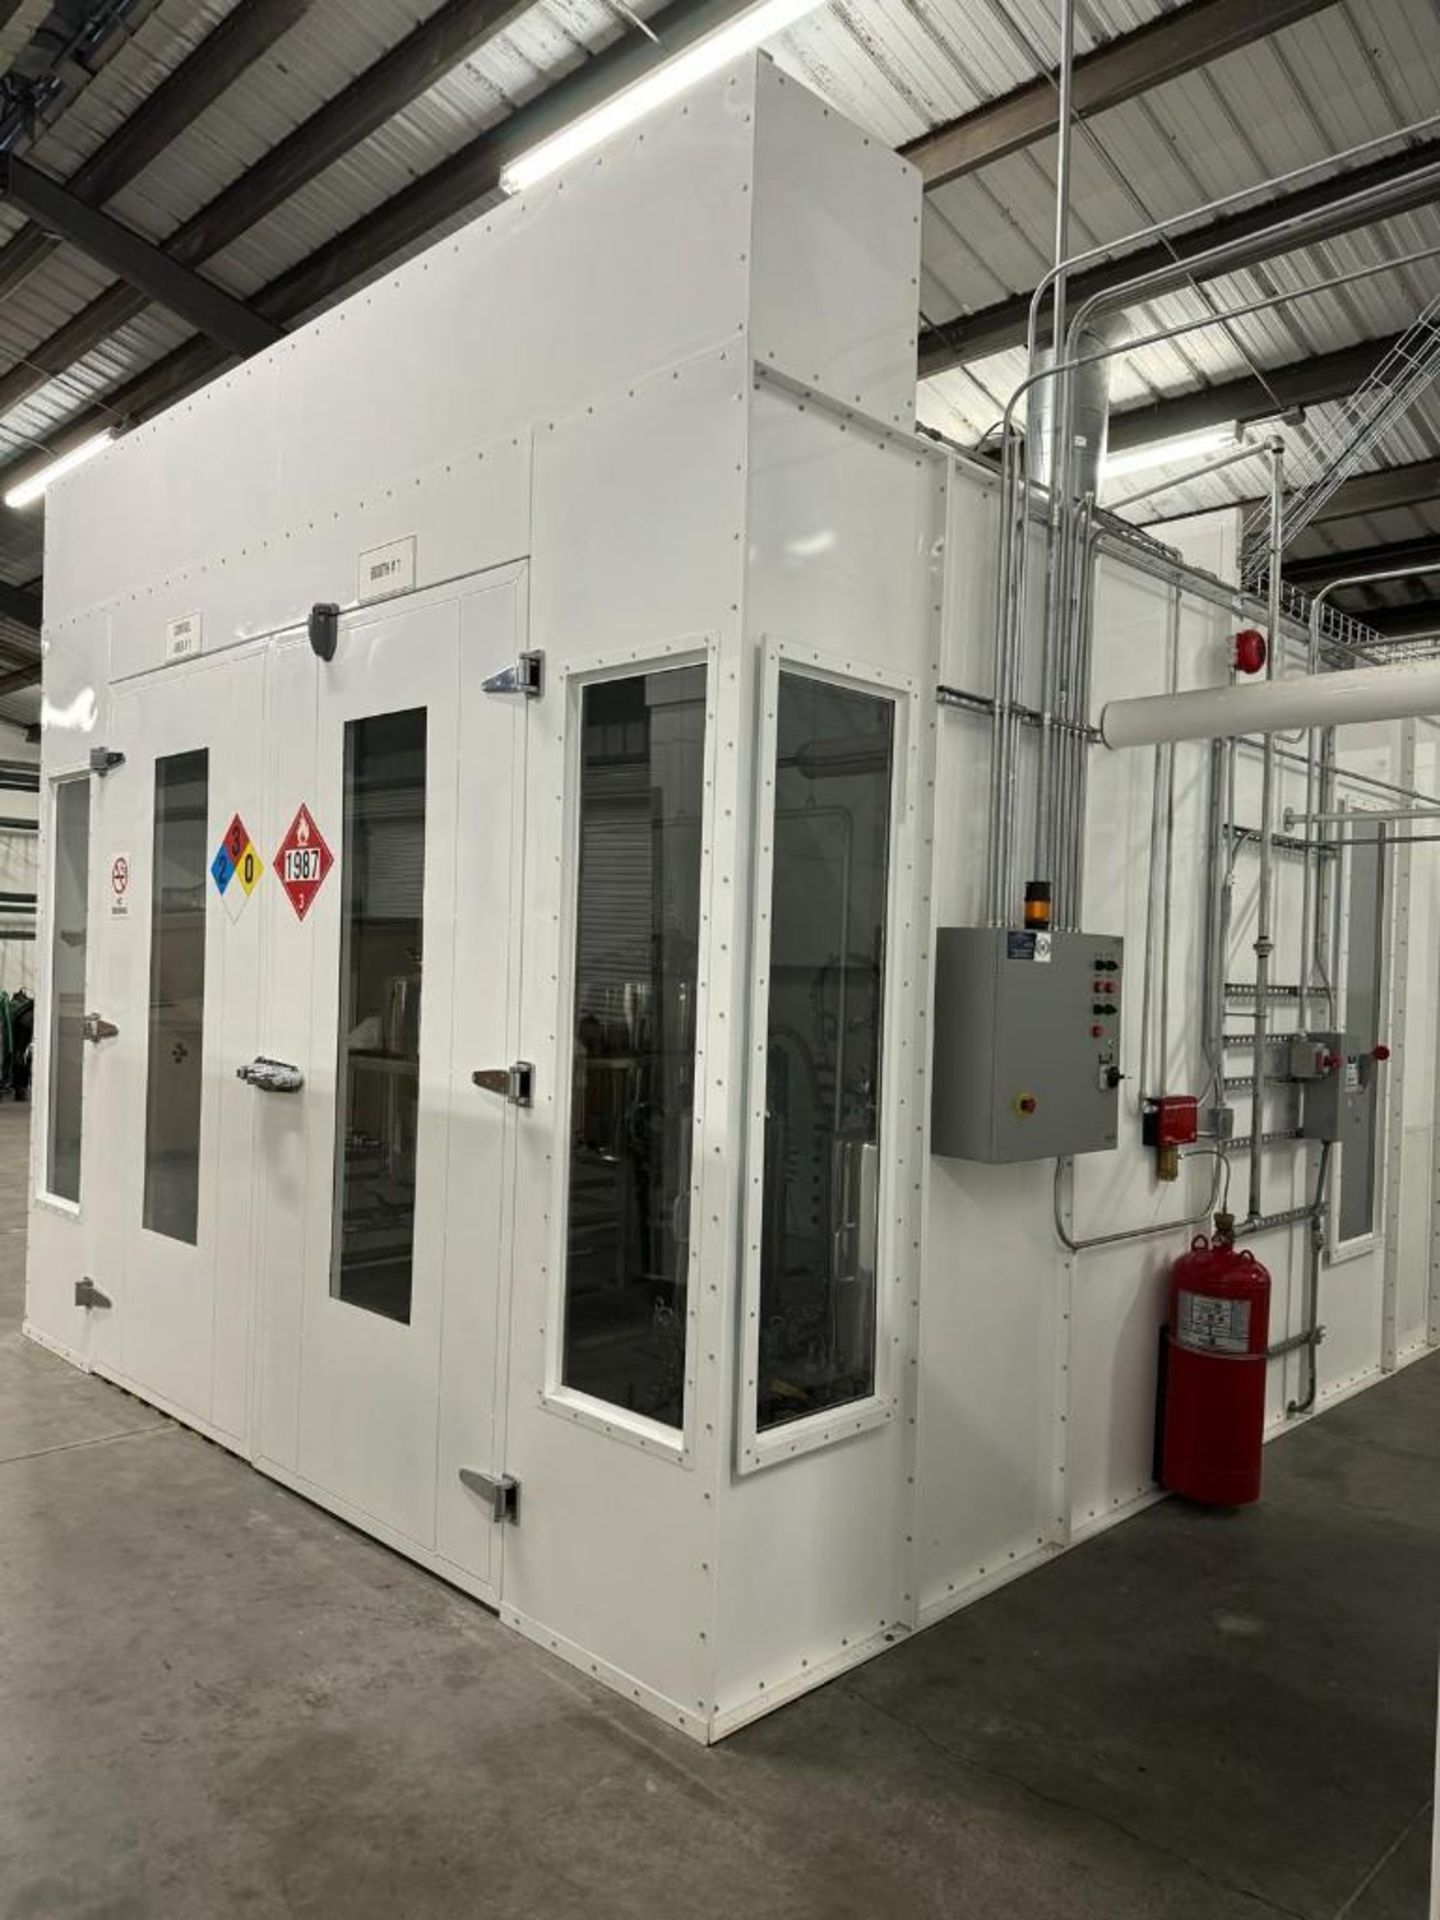 LOT: (2) Advanced Extraction Labs C1D1 Extraction Booths. Booth #1: M.E.G.A series DELUXE, Dimension